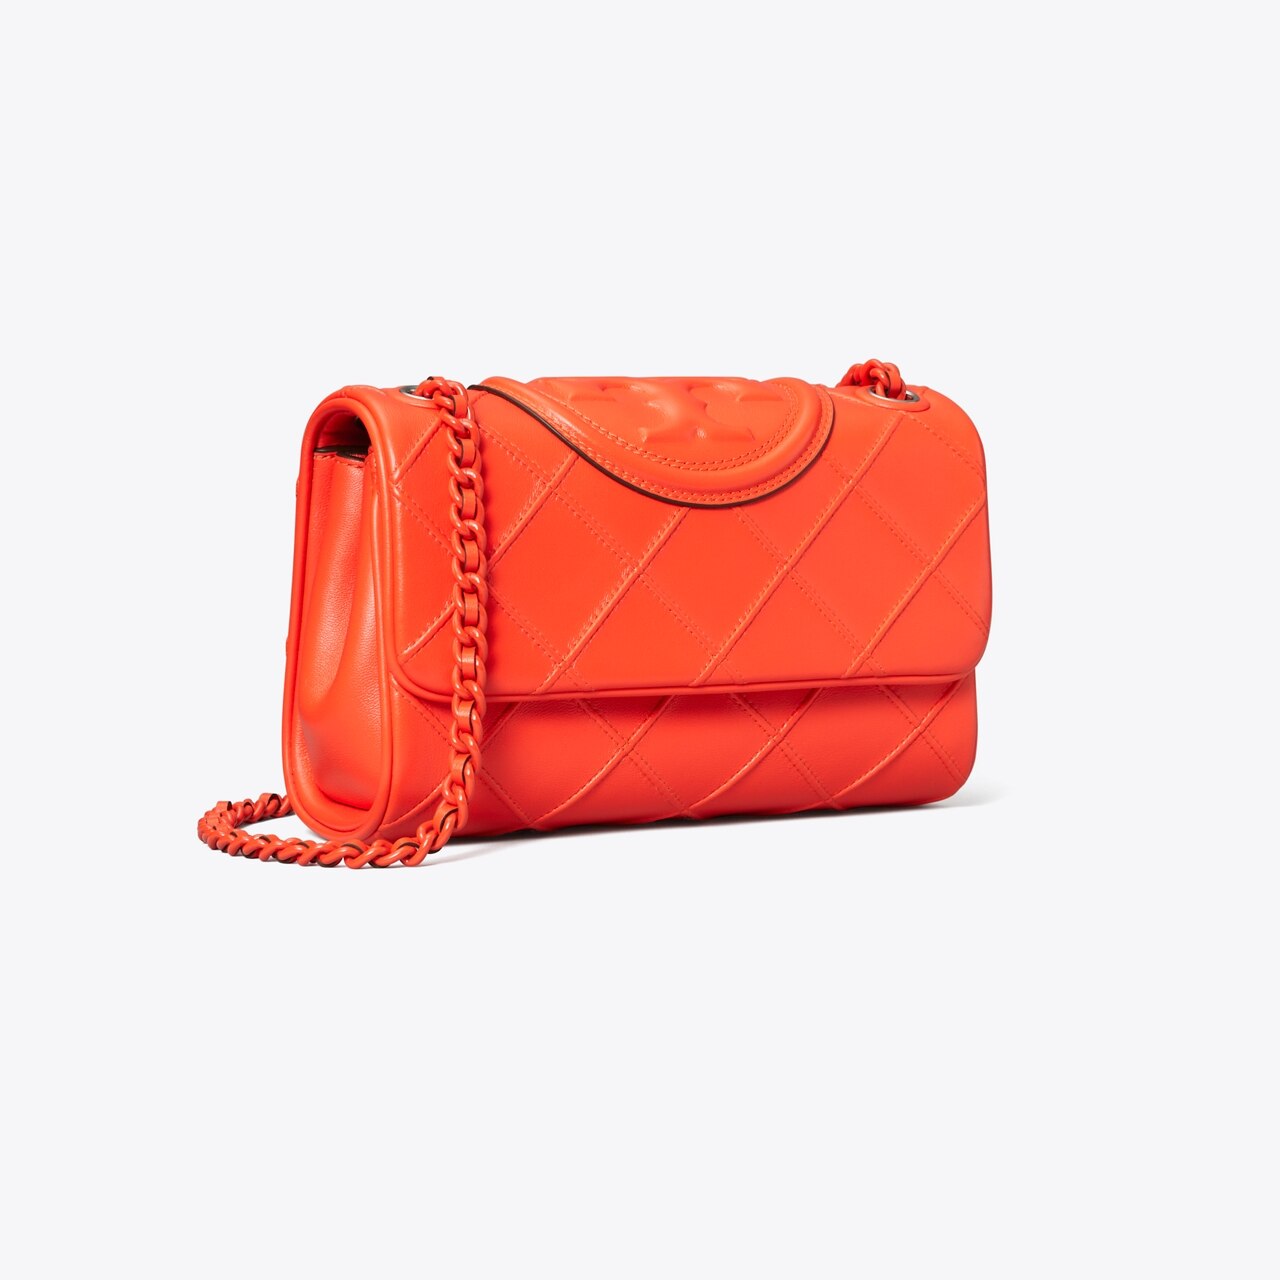 Fleming Soft of Tory Burch - Quilted leather bag orange colored